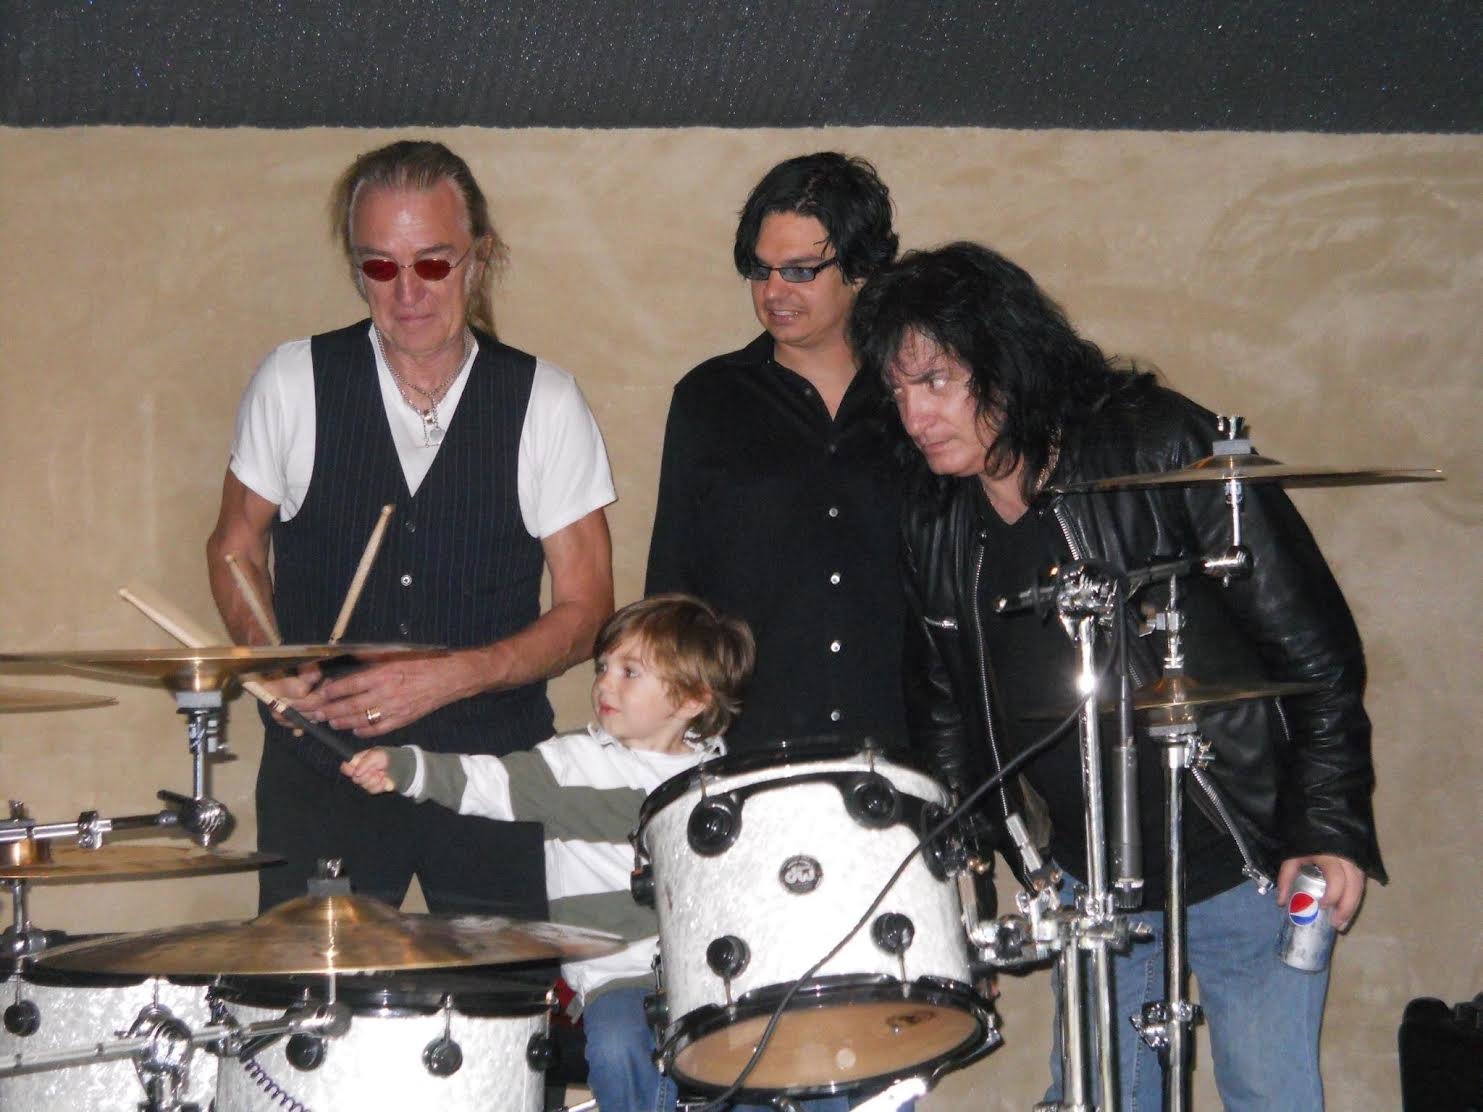 A photo of Julius as a 3-year-old with Roger Earl from Foghat, his father Jules, and Bobby Rondinelli from Black Sabbath.